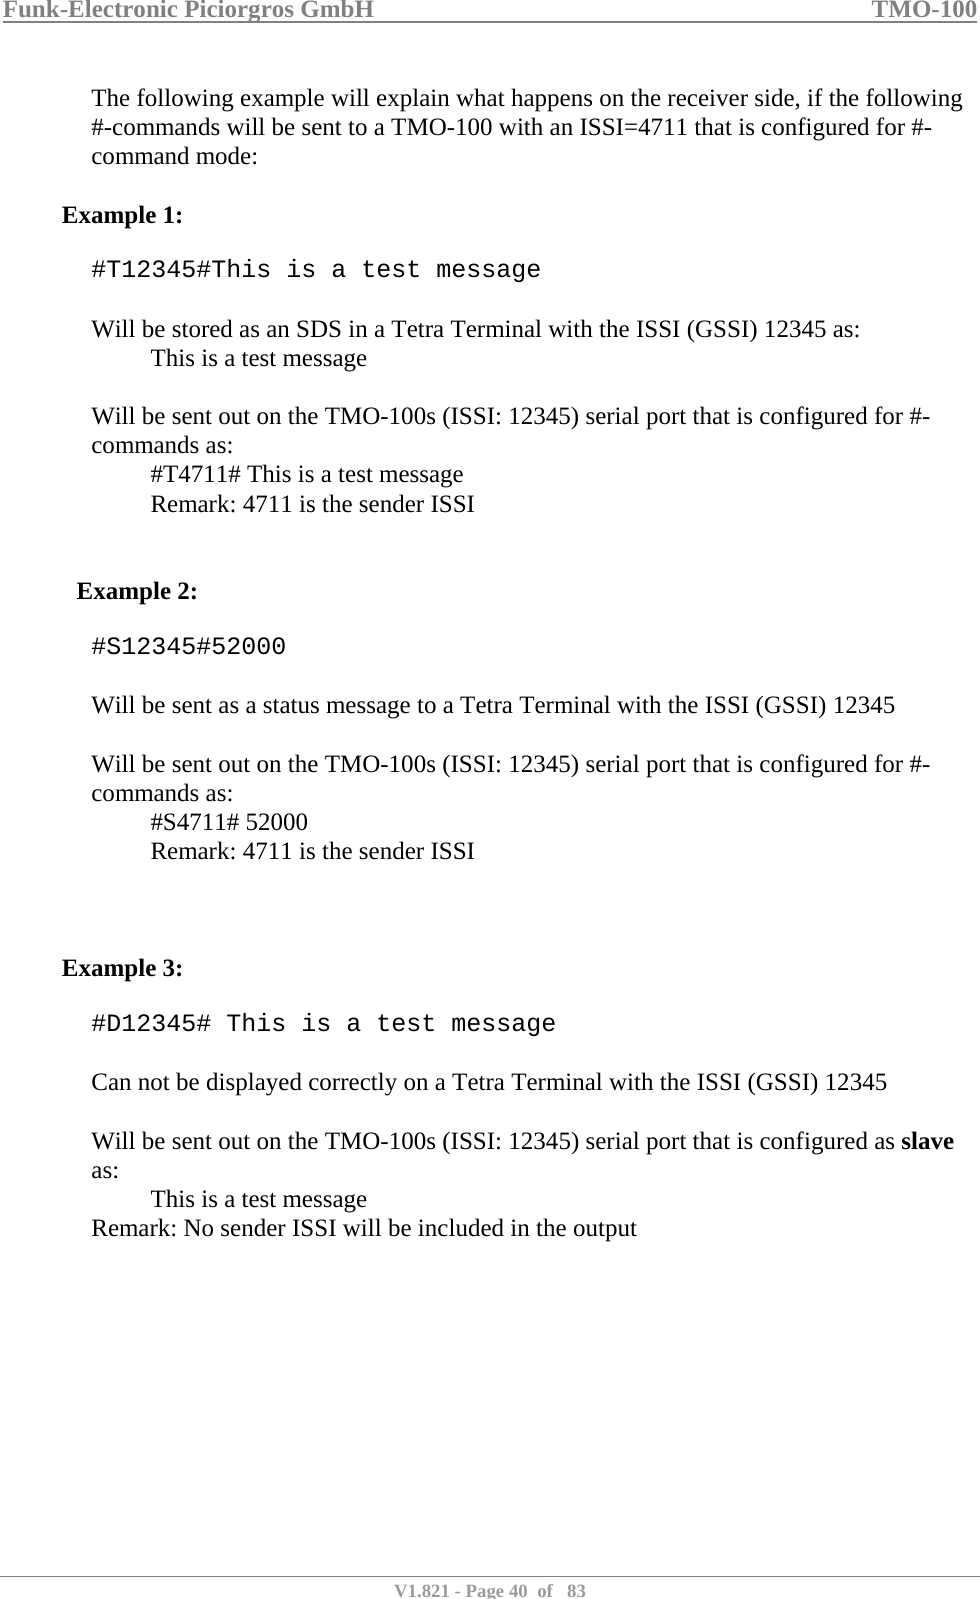 Funk-Electronic Piciorgros GmbH   TMO-100   V1.821 - Page 40  of   83   The following example will explain what happens on the receiver side, if the following #-commands will be sent to a TMO-100 with an ISSI=4711 that is configured for #-command mode:  Example 1:  #T12345#This is a test message  Will be stored as an SDS in a Tetra Terminal with the ISSI (GSSI) 12345 as:   This is a test message  Will be sent out on the TMO-100s (ISSI: 12345) serial port that is configured for #-commands as: #T4711# This is a test message   Remark: 4711 is the sender ISSI    Example 2:  #S12345#52000  Will be sent as a status message to a Tetra Terminal with the ISSI (GSSI) 12345  Will be sent out on the TMO-100s (ISSI: 12345) serial port that is configured for #-commands as: #S4711# 52000   Remark: 4711 is the sender ISSI    Example 3:  #D12345# This is a test message  Can not be displayed correctly on a Tetra Terminal with the ISSI (GSSI) 12345  Will be sent out on the TMO-100s (ISSI: 12345) serial port that is configured as slave as:  This is a test message  Remark: No sender ISSI will be included in the output   